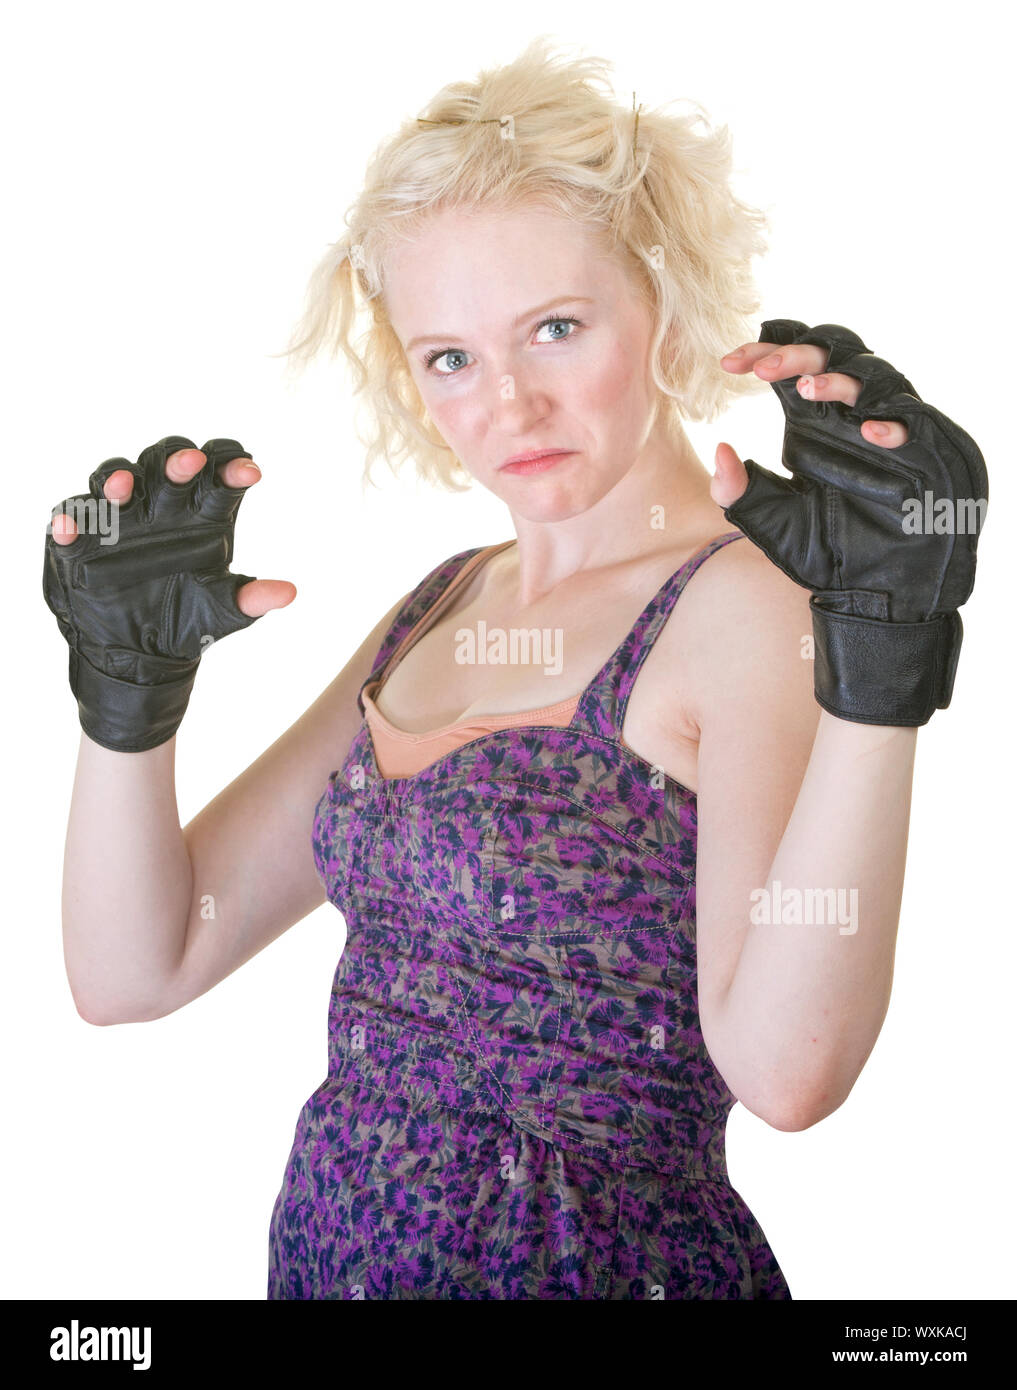 Tough MMA fighter in dress and gloves Stock Photo